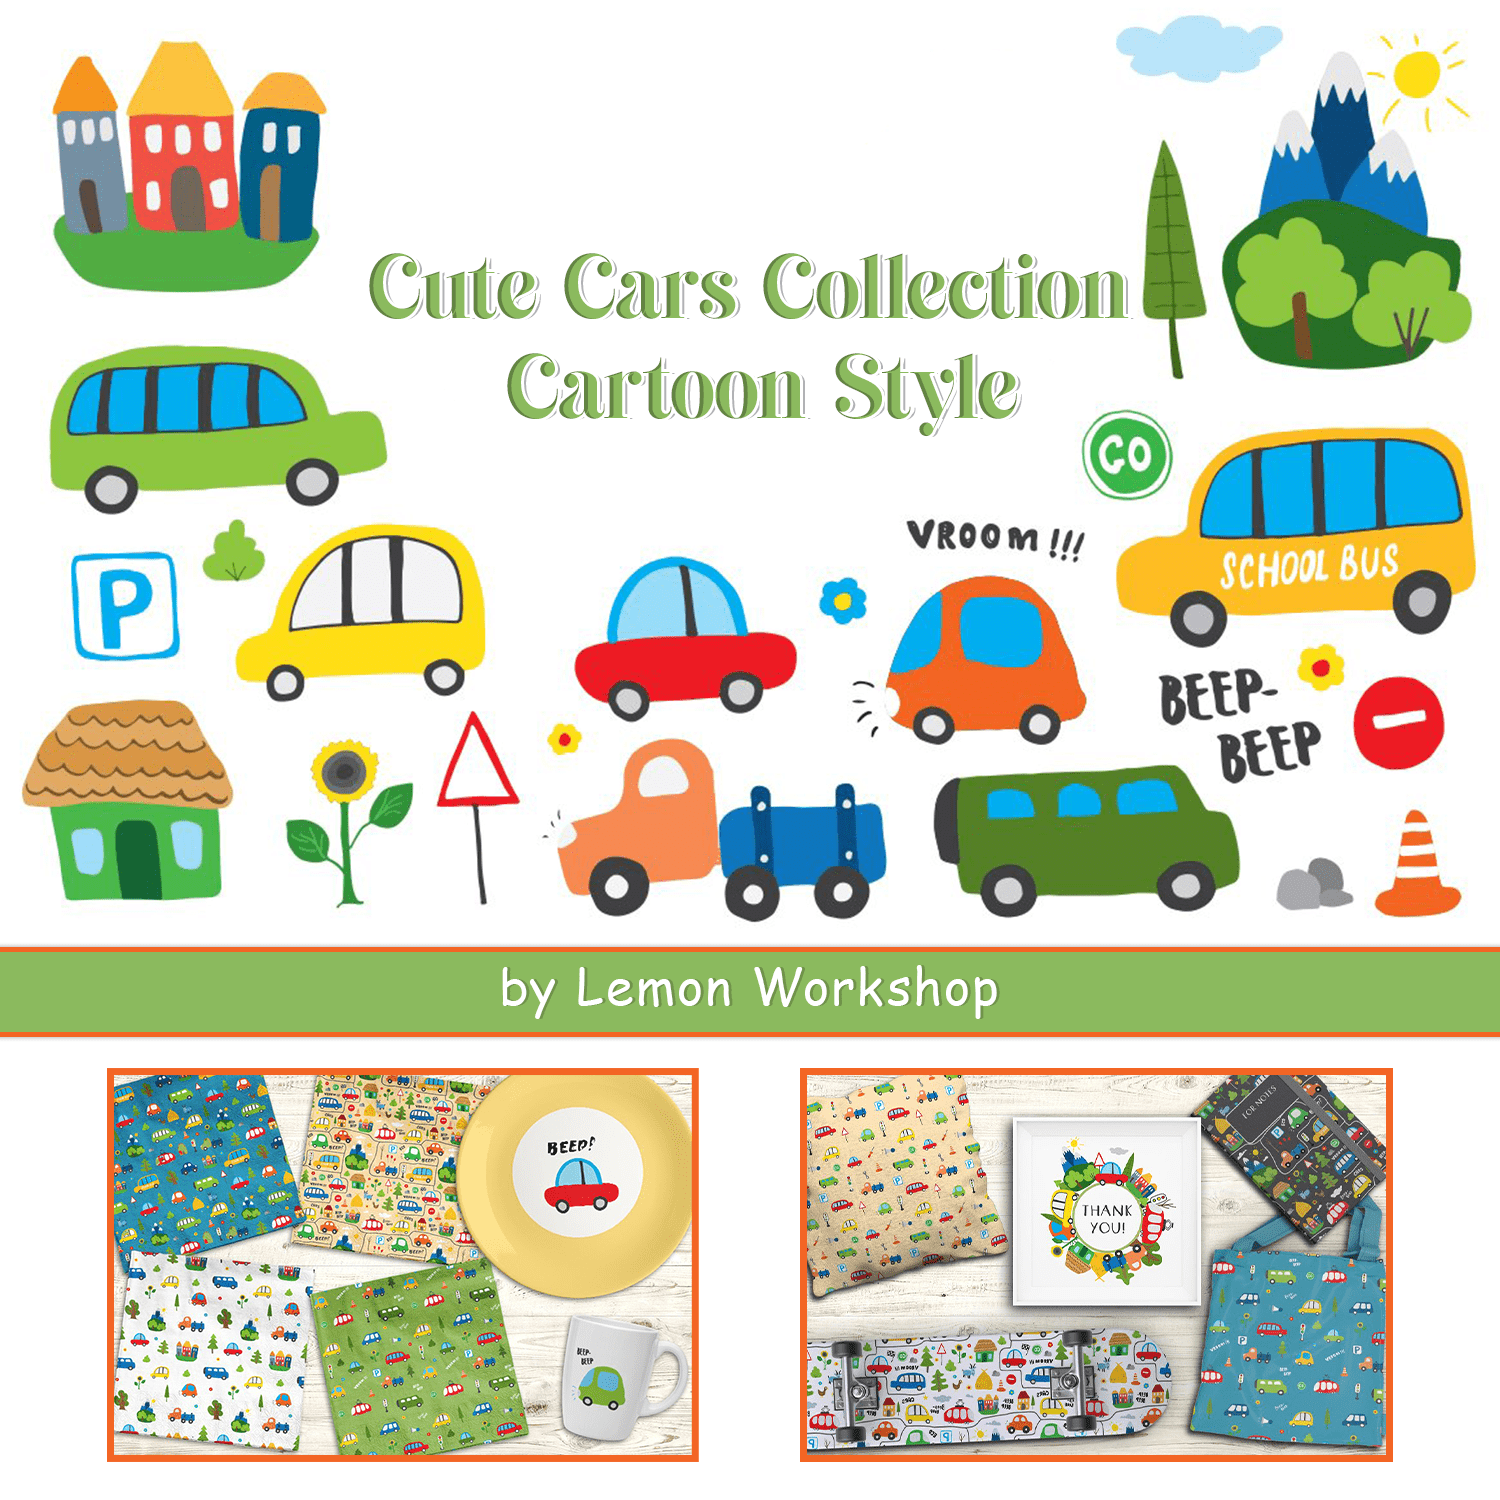 Cute Cars Collection, Cartoon Style cover.